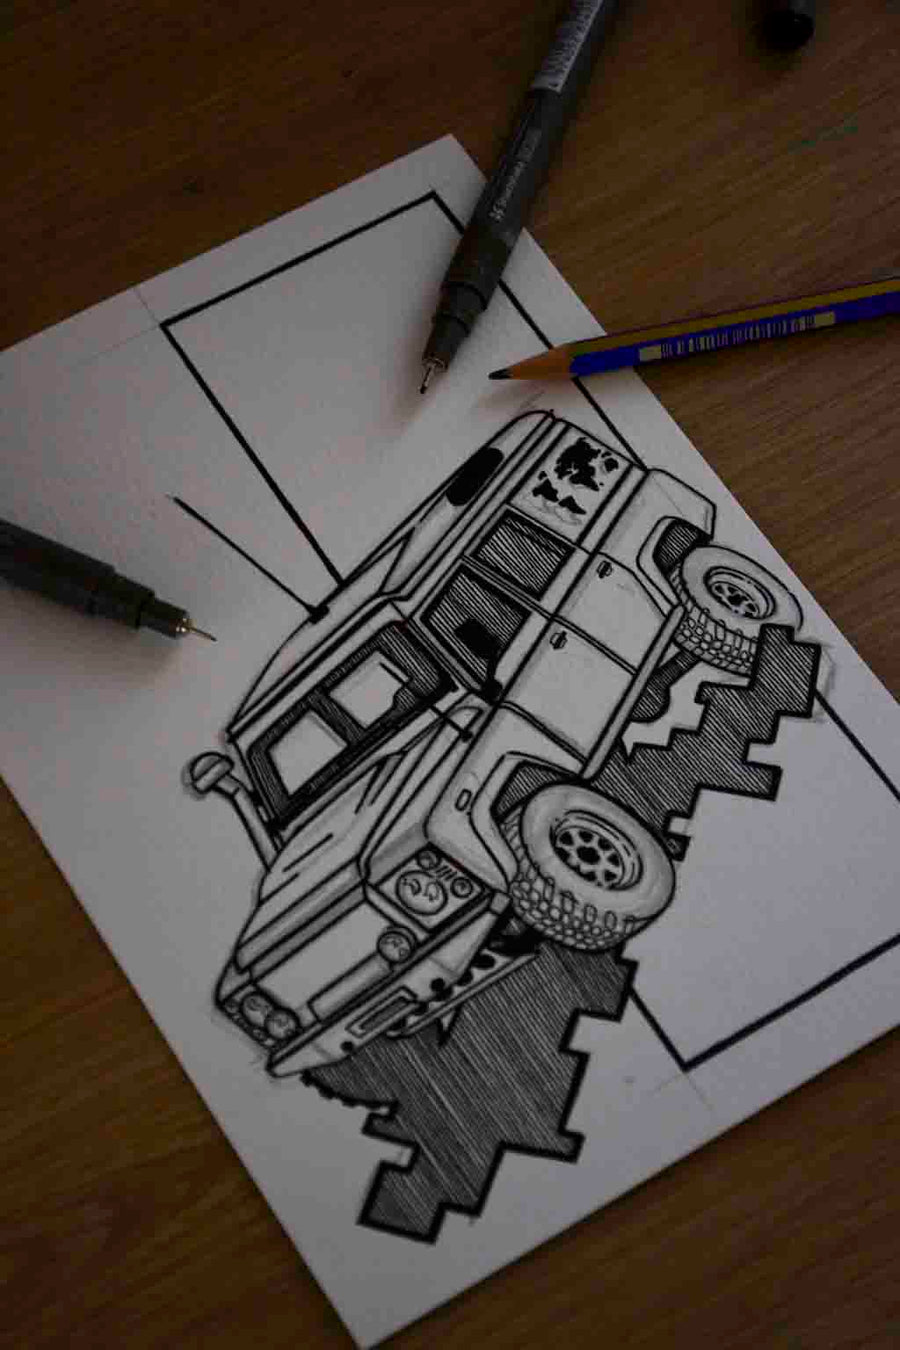 Inspiration from @polarlandy /Land Rover Defender Handmade Artwork and Coloring Pages (Option Puzzle)